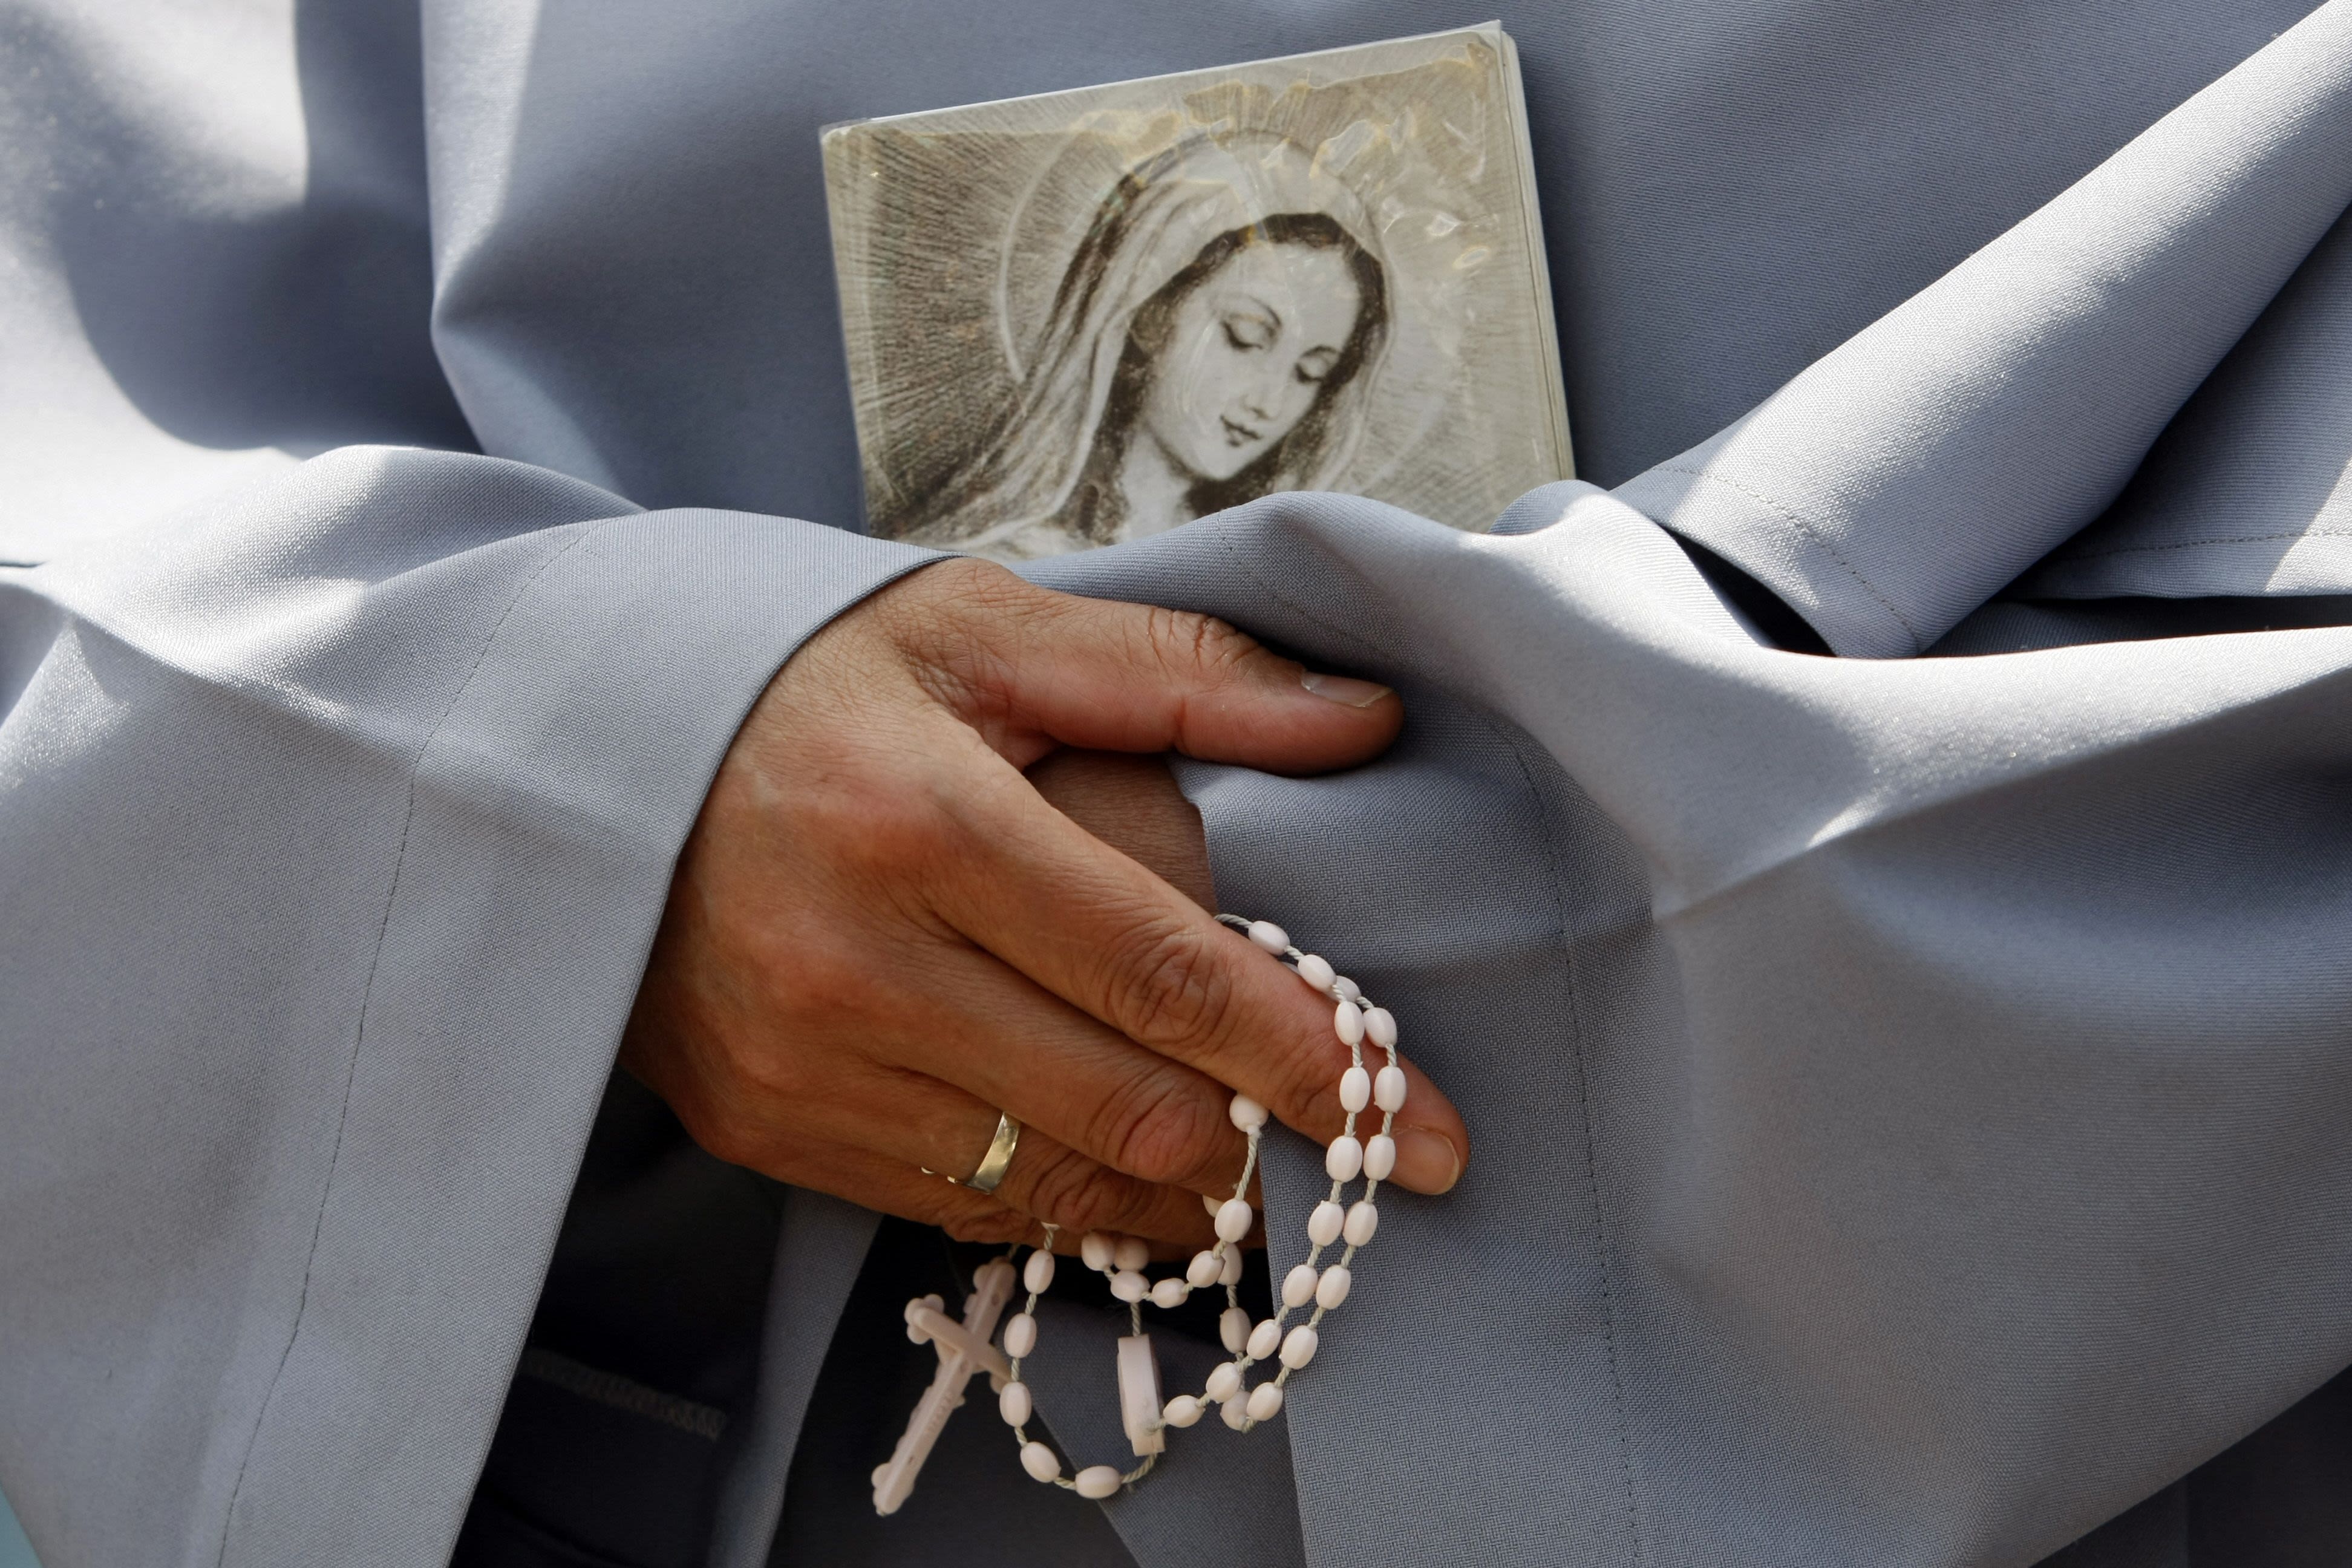 Nun warns of new "cult" after convent leaves Catholic Church